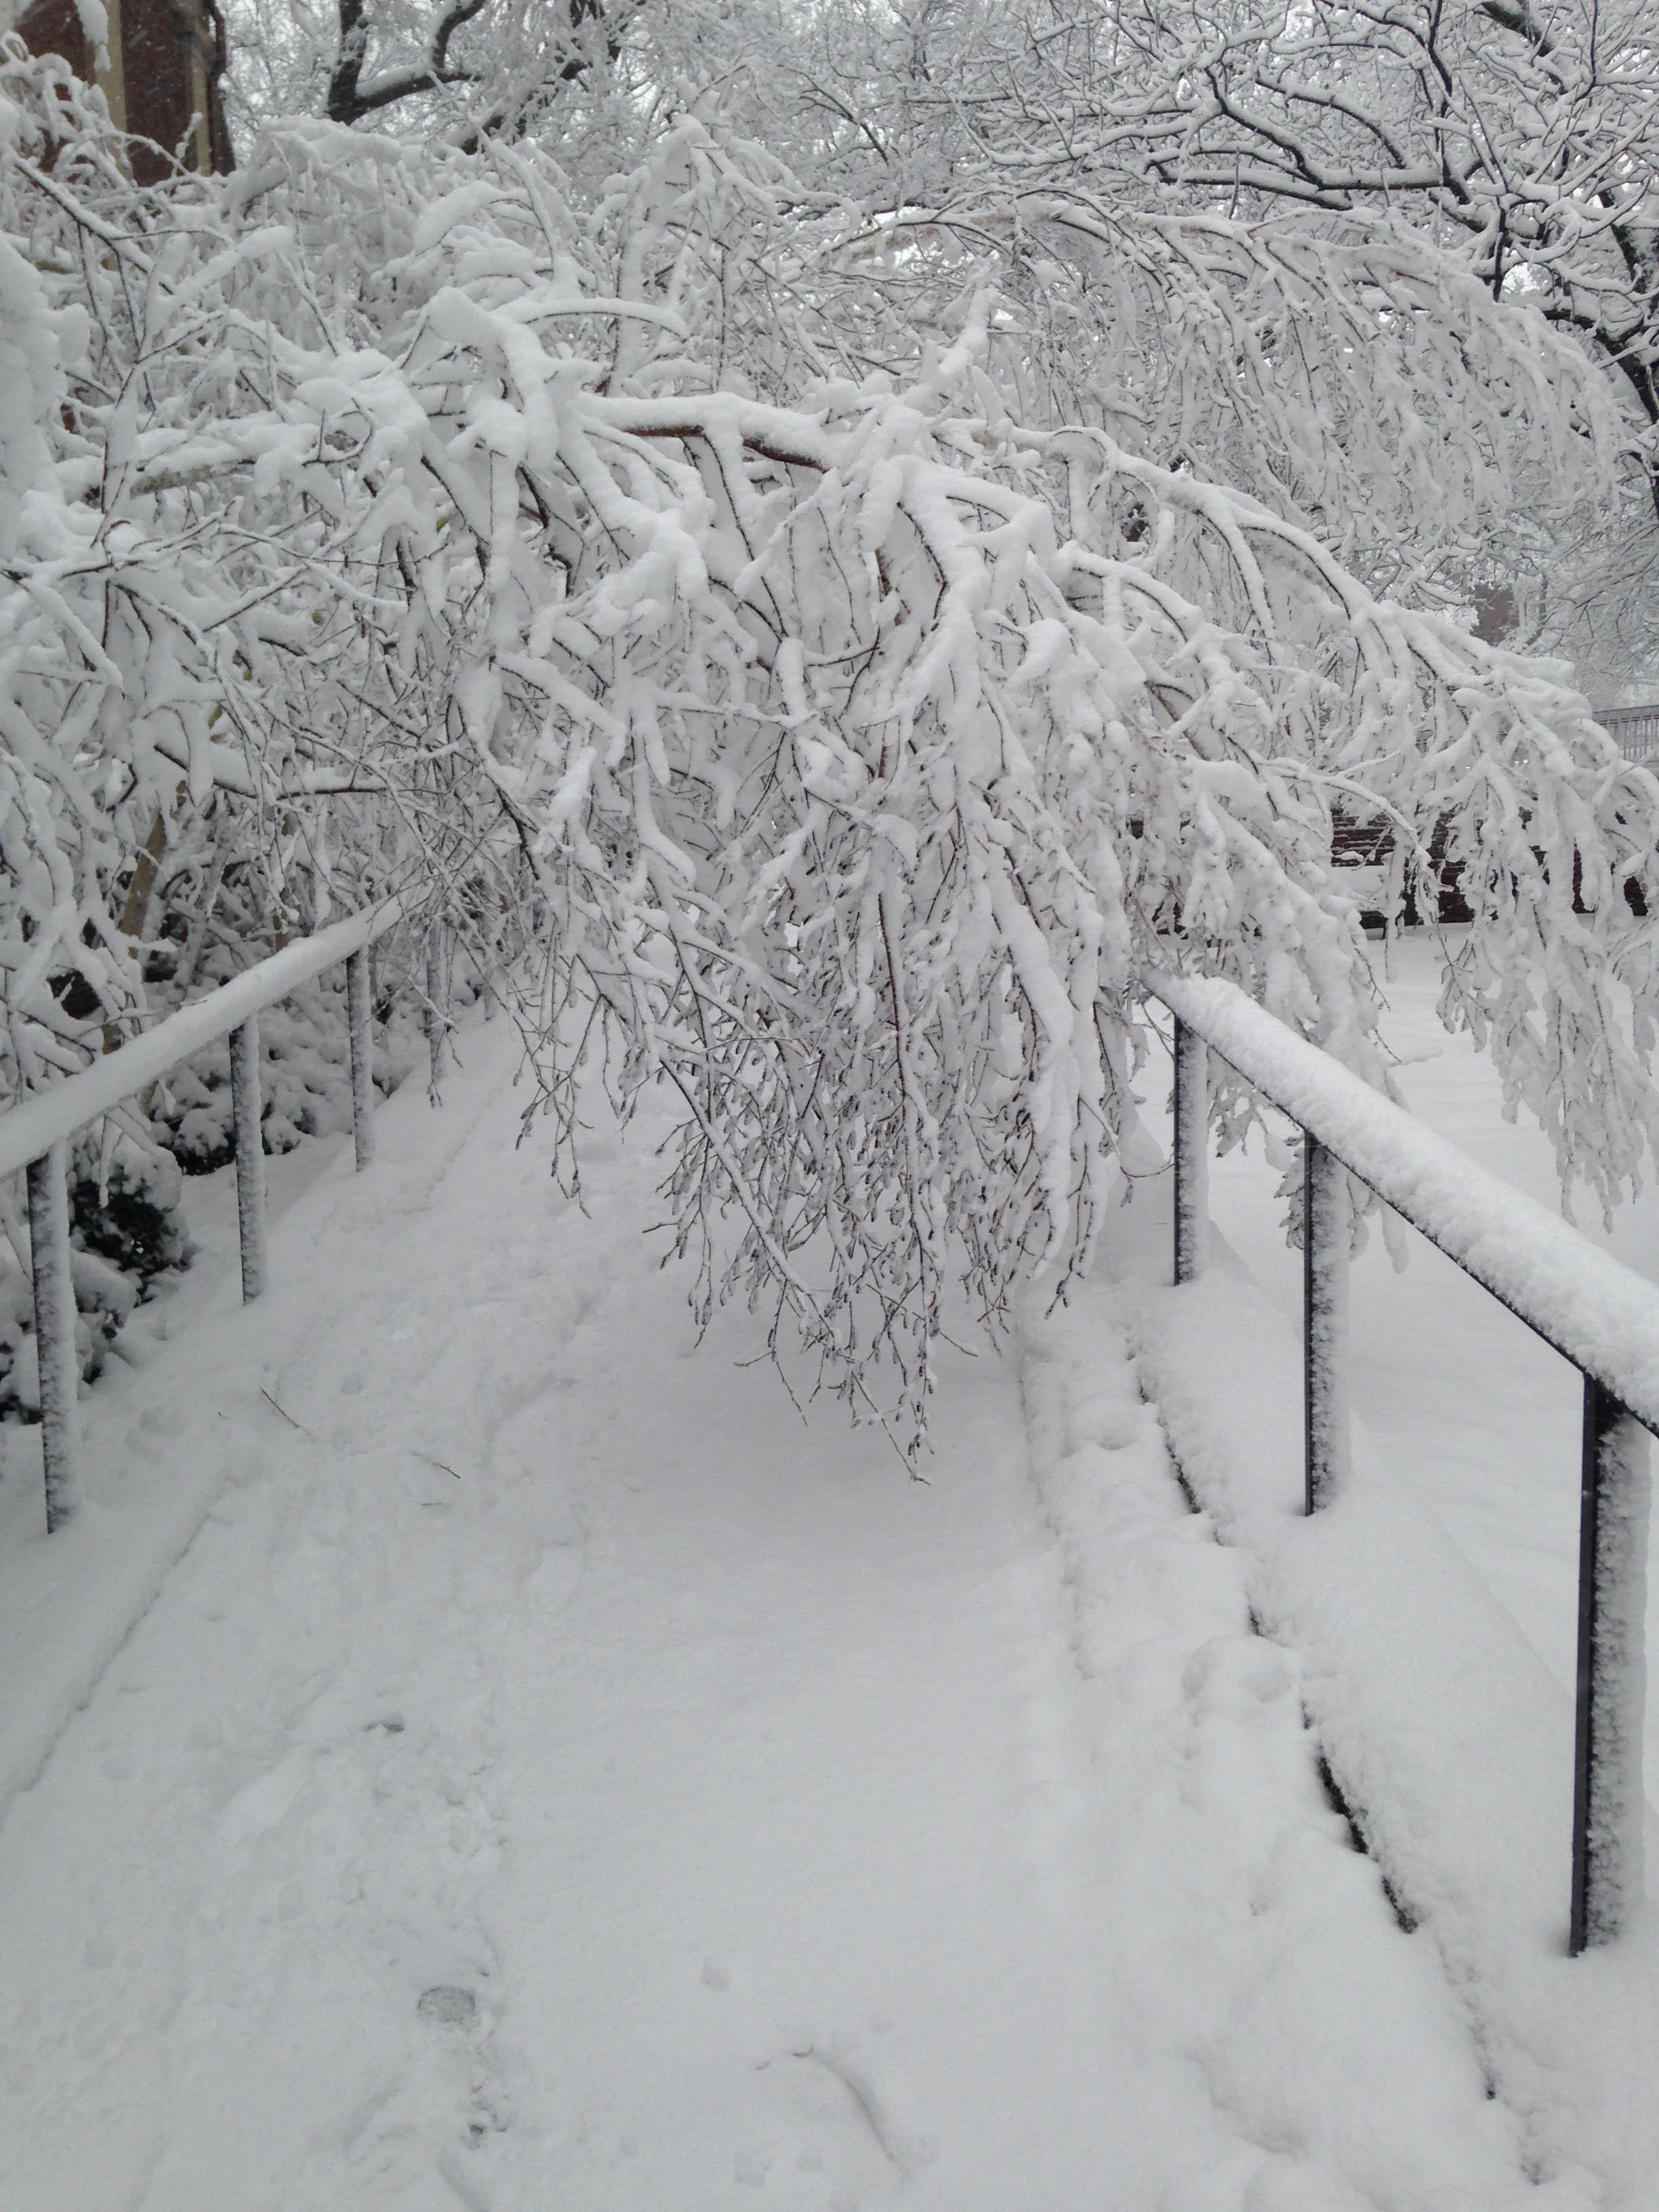 A tree branch, weighed down by snow, blocks a walkway.